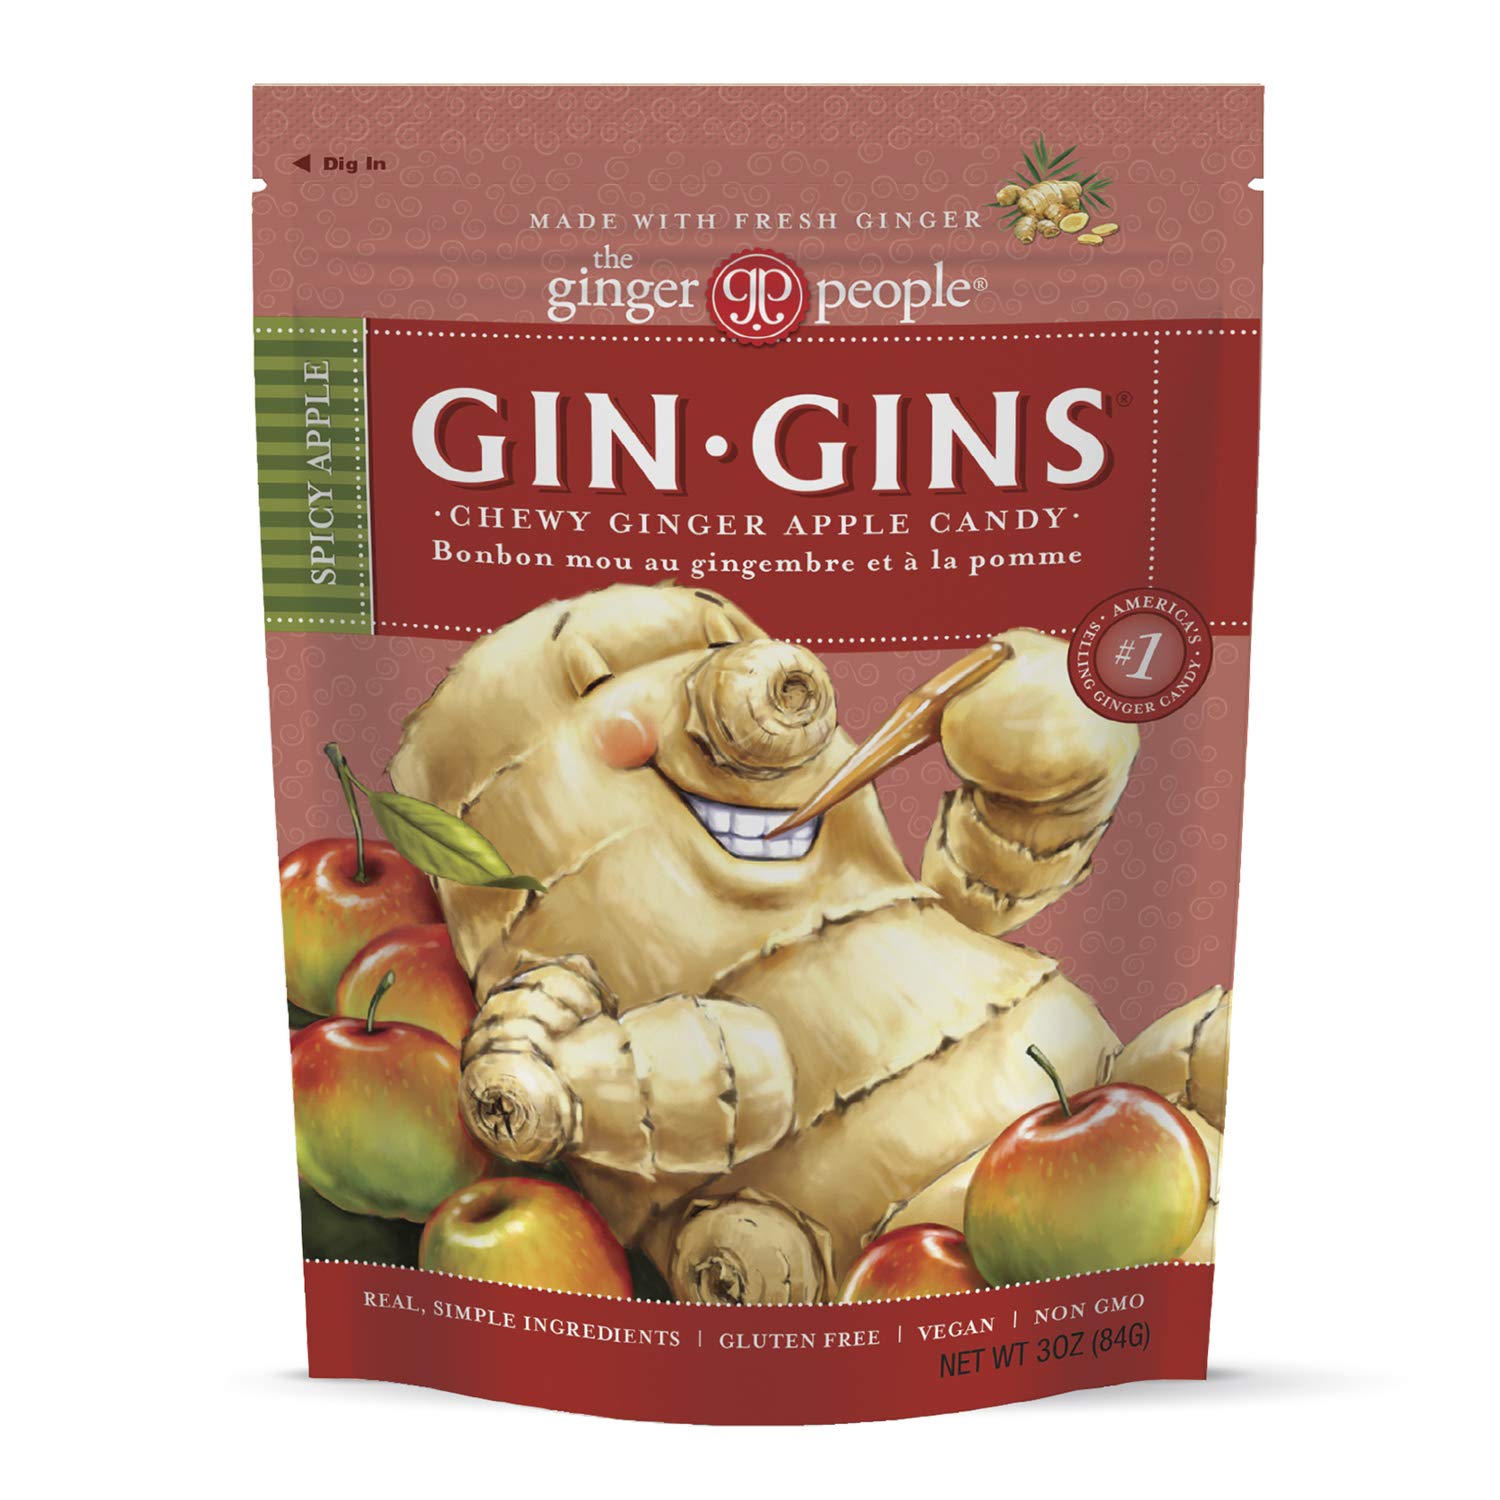 GIN GINS Spicy Apple Ginger Chews by The Ginger People – Individually Wrapped Healthy Candy – 3 oz Bag – Pack of 1